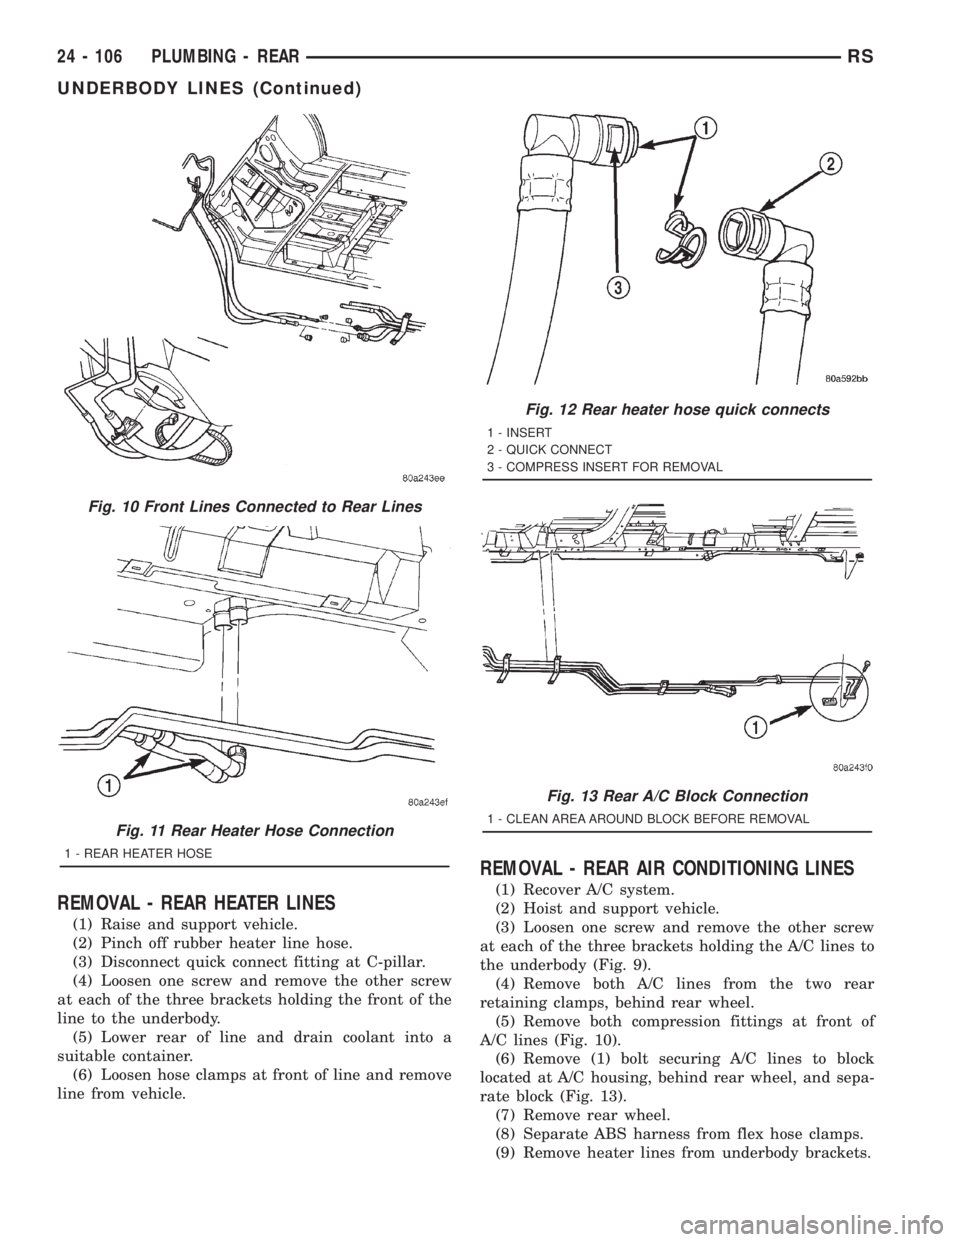 CHRYSLER VOYAGER 2001  Service Manual REMOVAL - REAR HEATER LINES
(1) Raise and support vehicle.
(2) Pinch off rubber heater line hose.
(3) Disconnect quick connect fitting at C-pillar.
(4) Loosen one screw and remove the other screw
at e